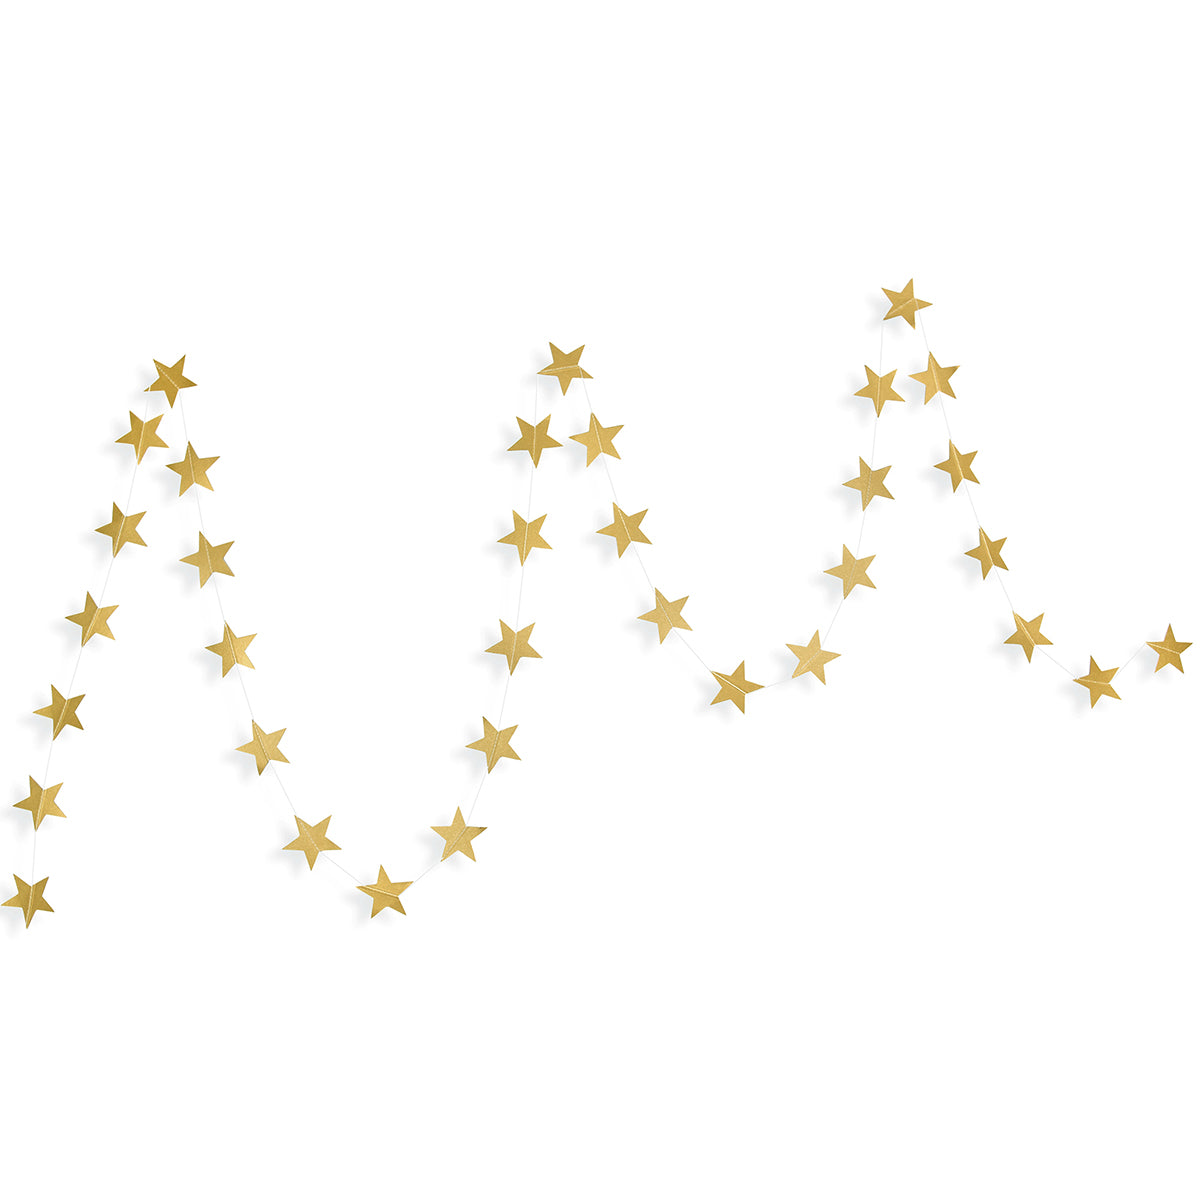 A string of gold stars paper garland show with a white background. 